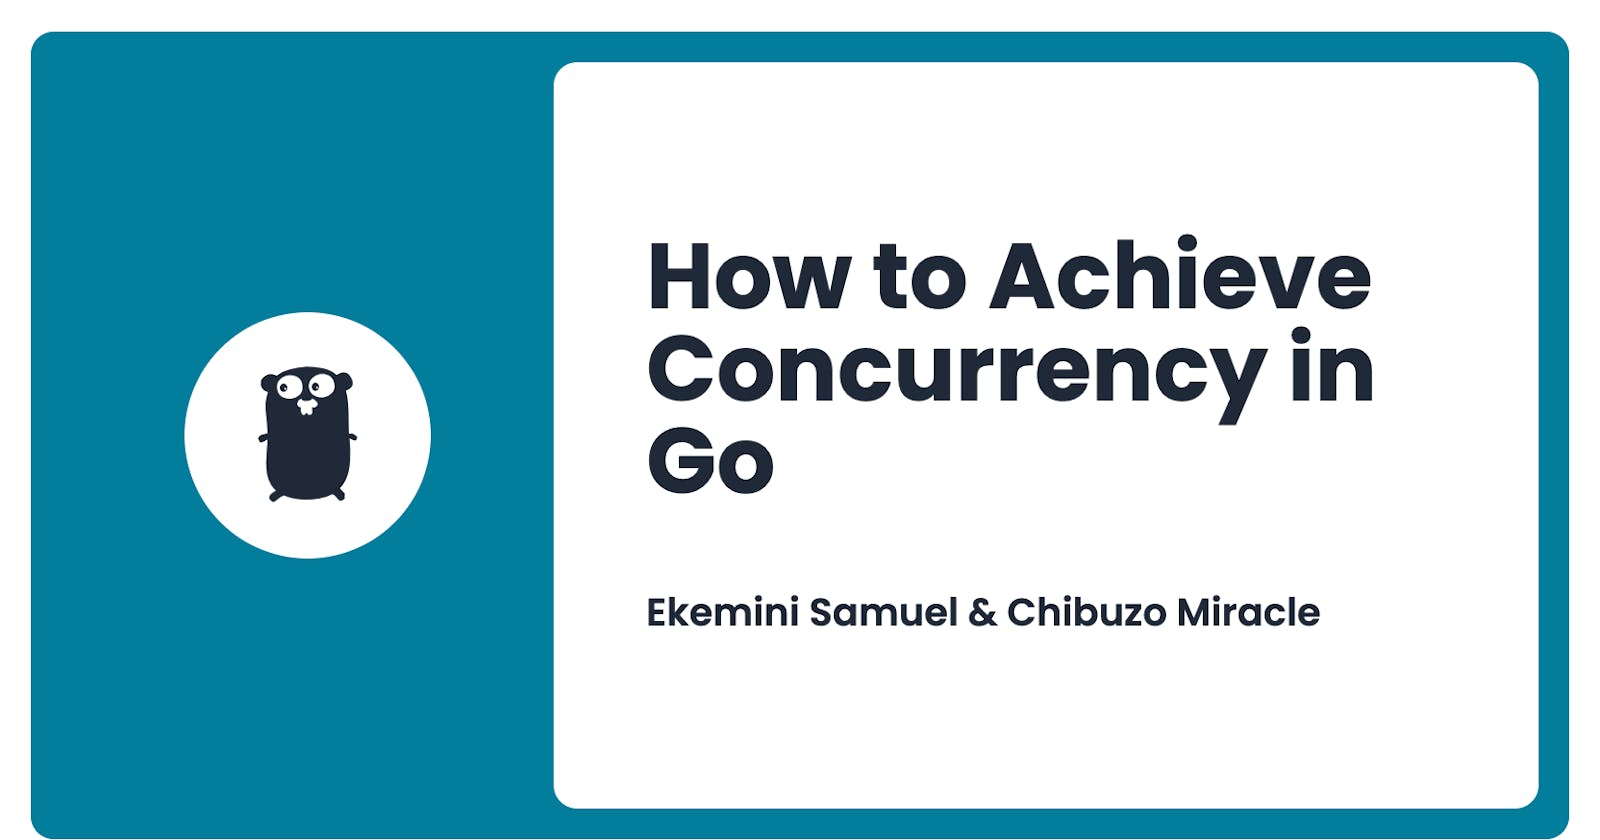 How to Achieve Concurrency in Go